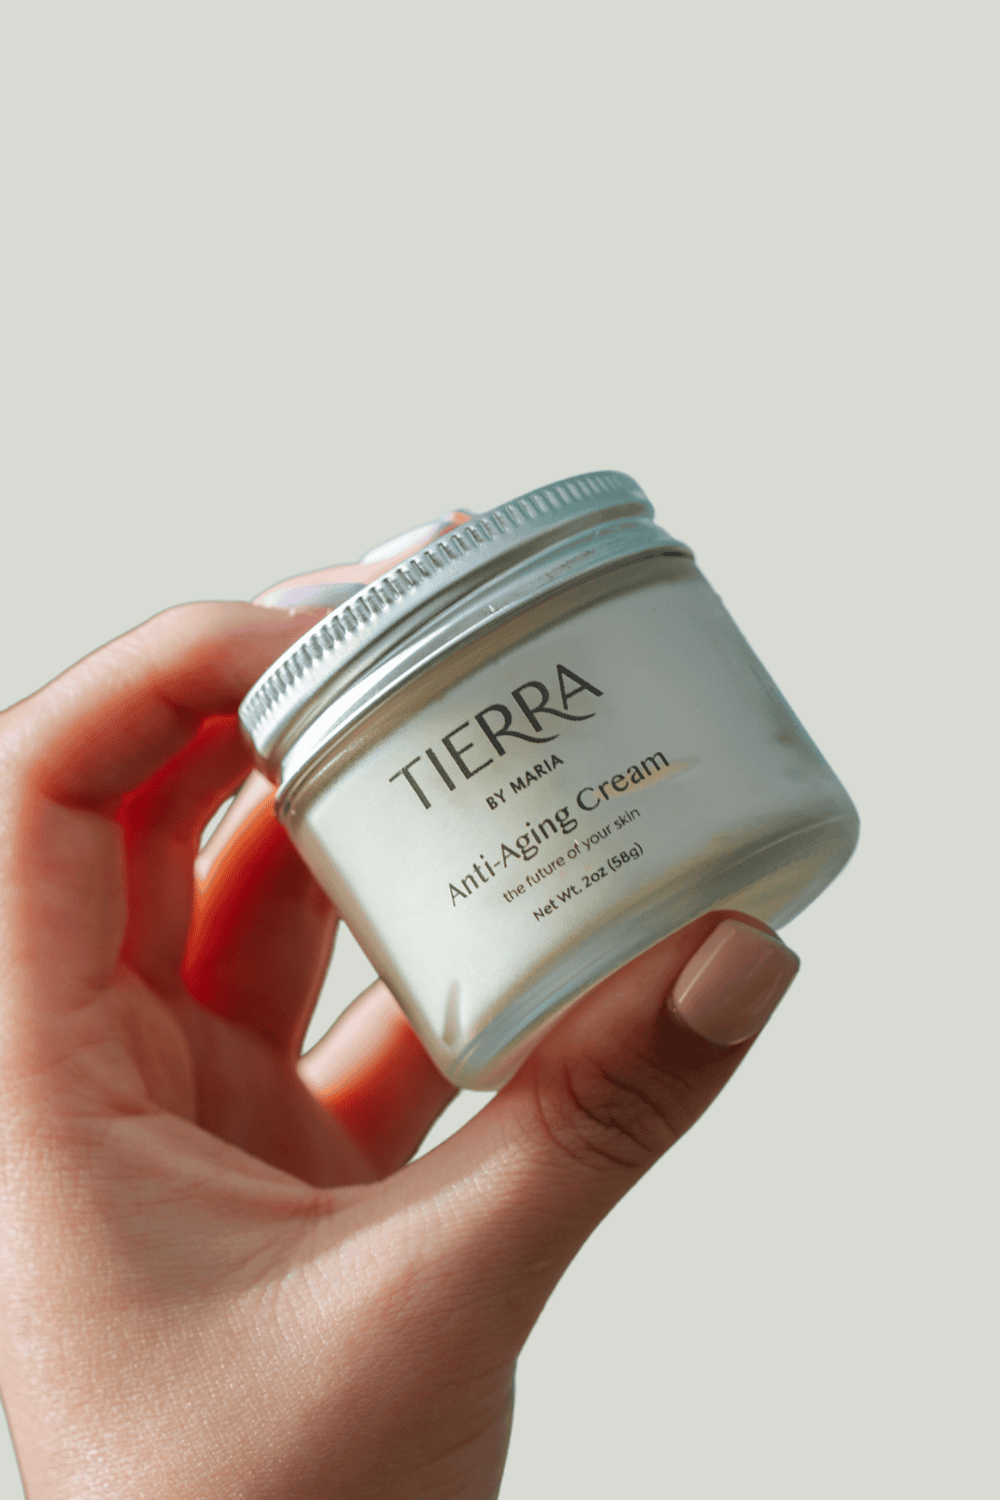 Shop Best Anti-Aging Cream - Vegan, Sustainable Skin Care For Glowing Skin - Tierra by Maria